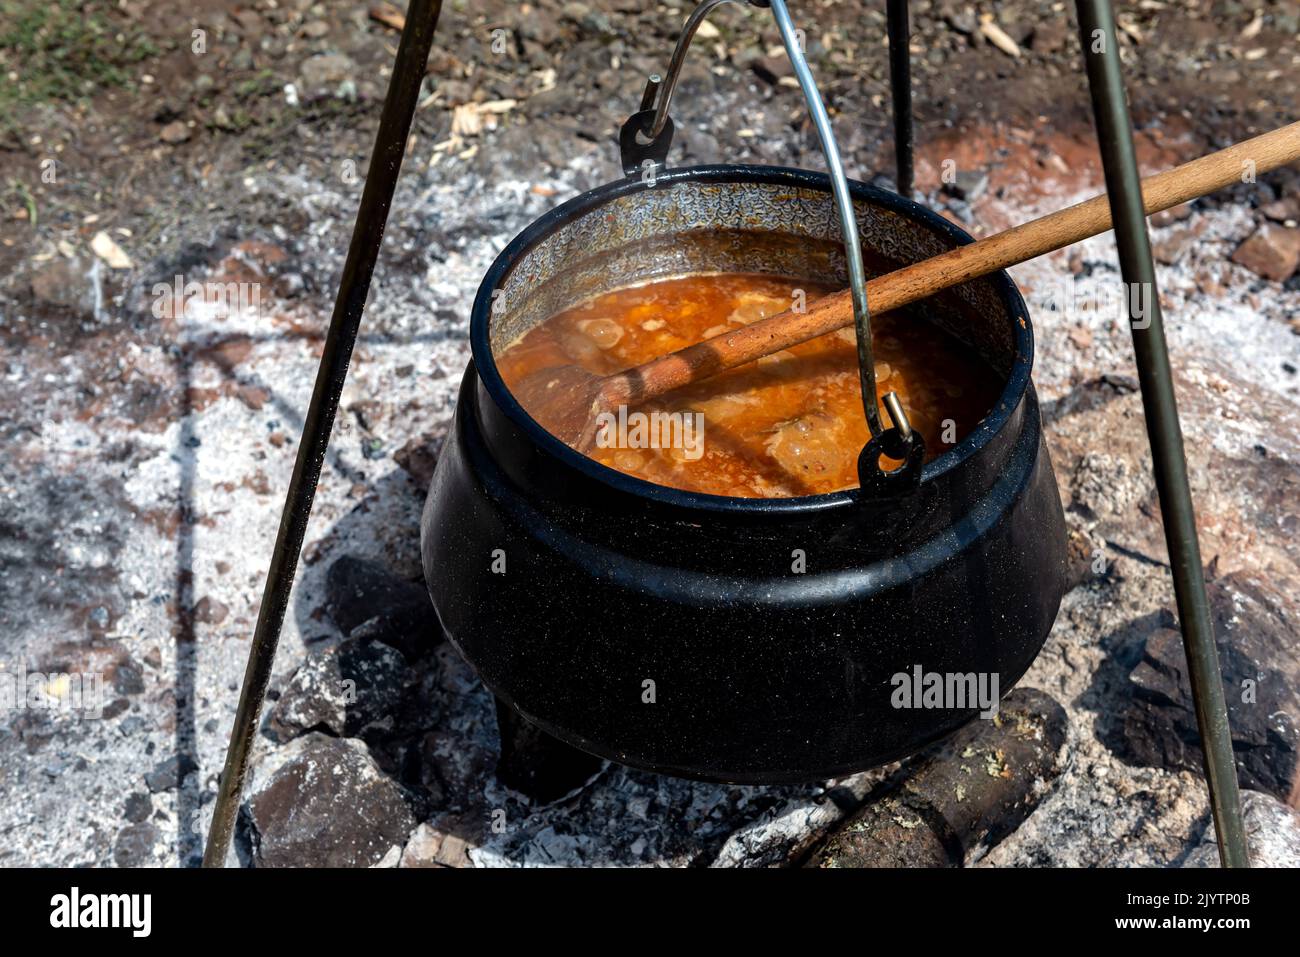 Cooking goulash in a cauldron on an open fire in the nature. Stock Photo